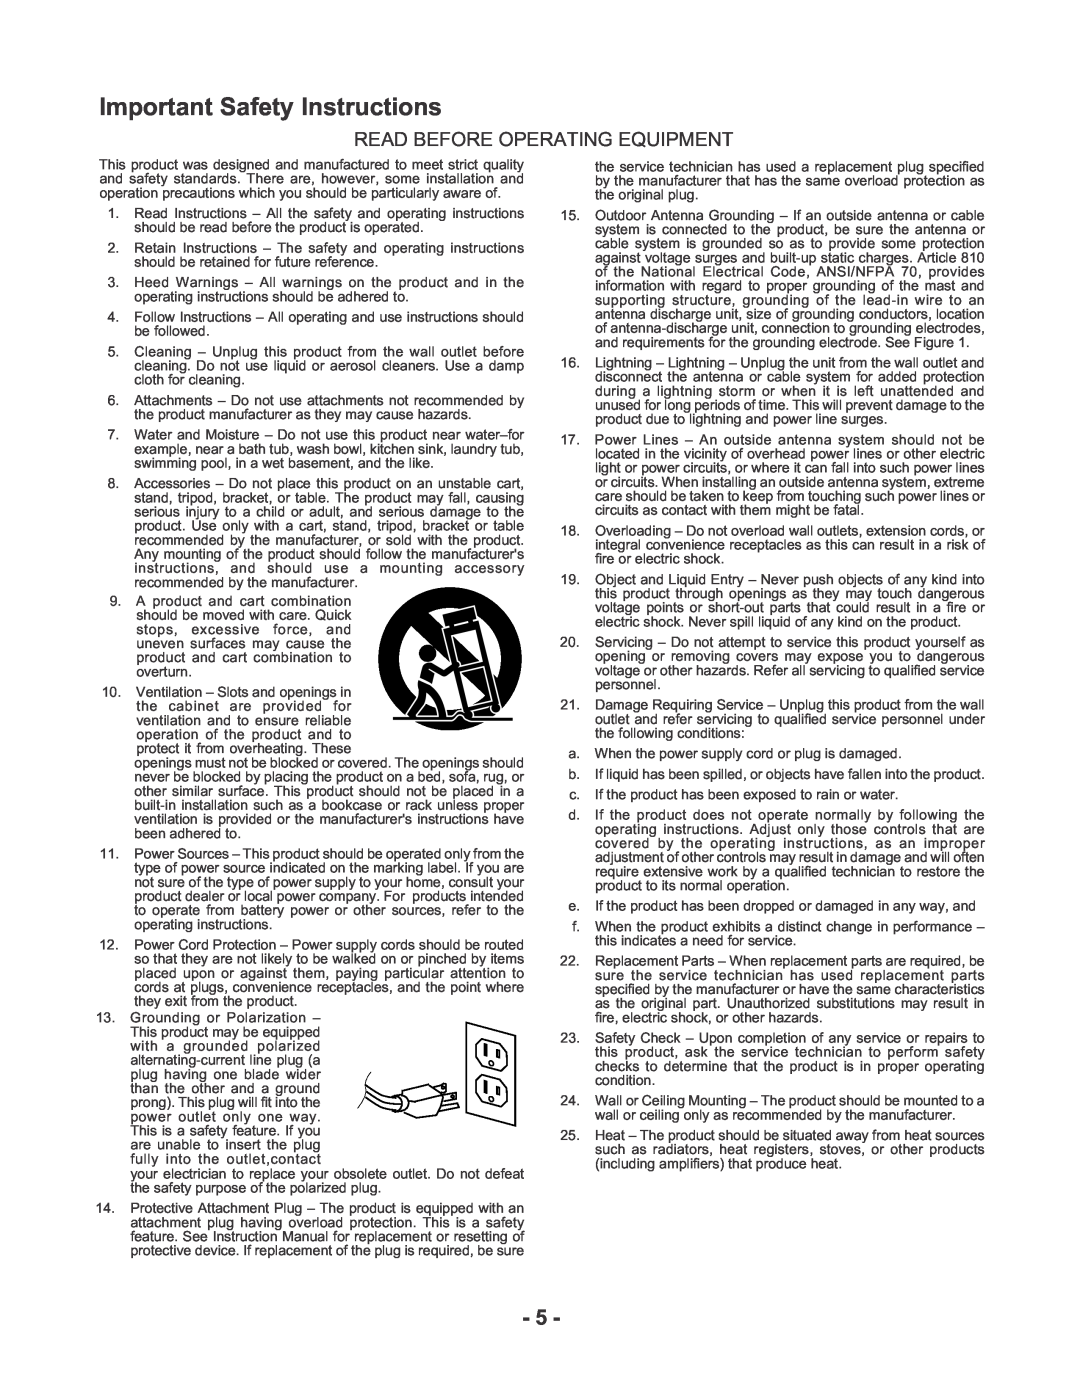 Marantz CDR510 manual Important Safety Instructions, Read Before Operating Equipment 